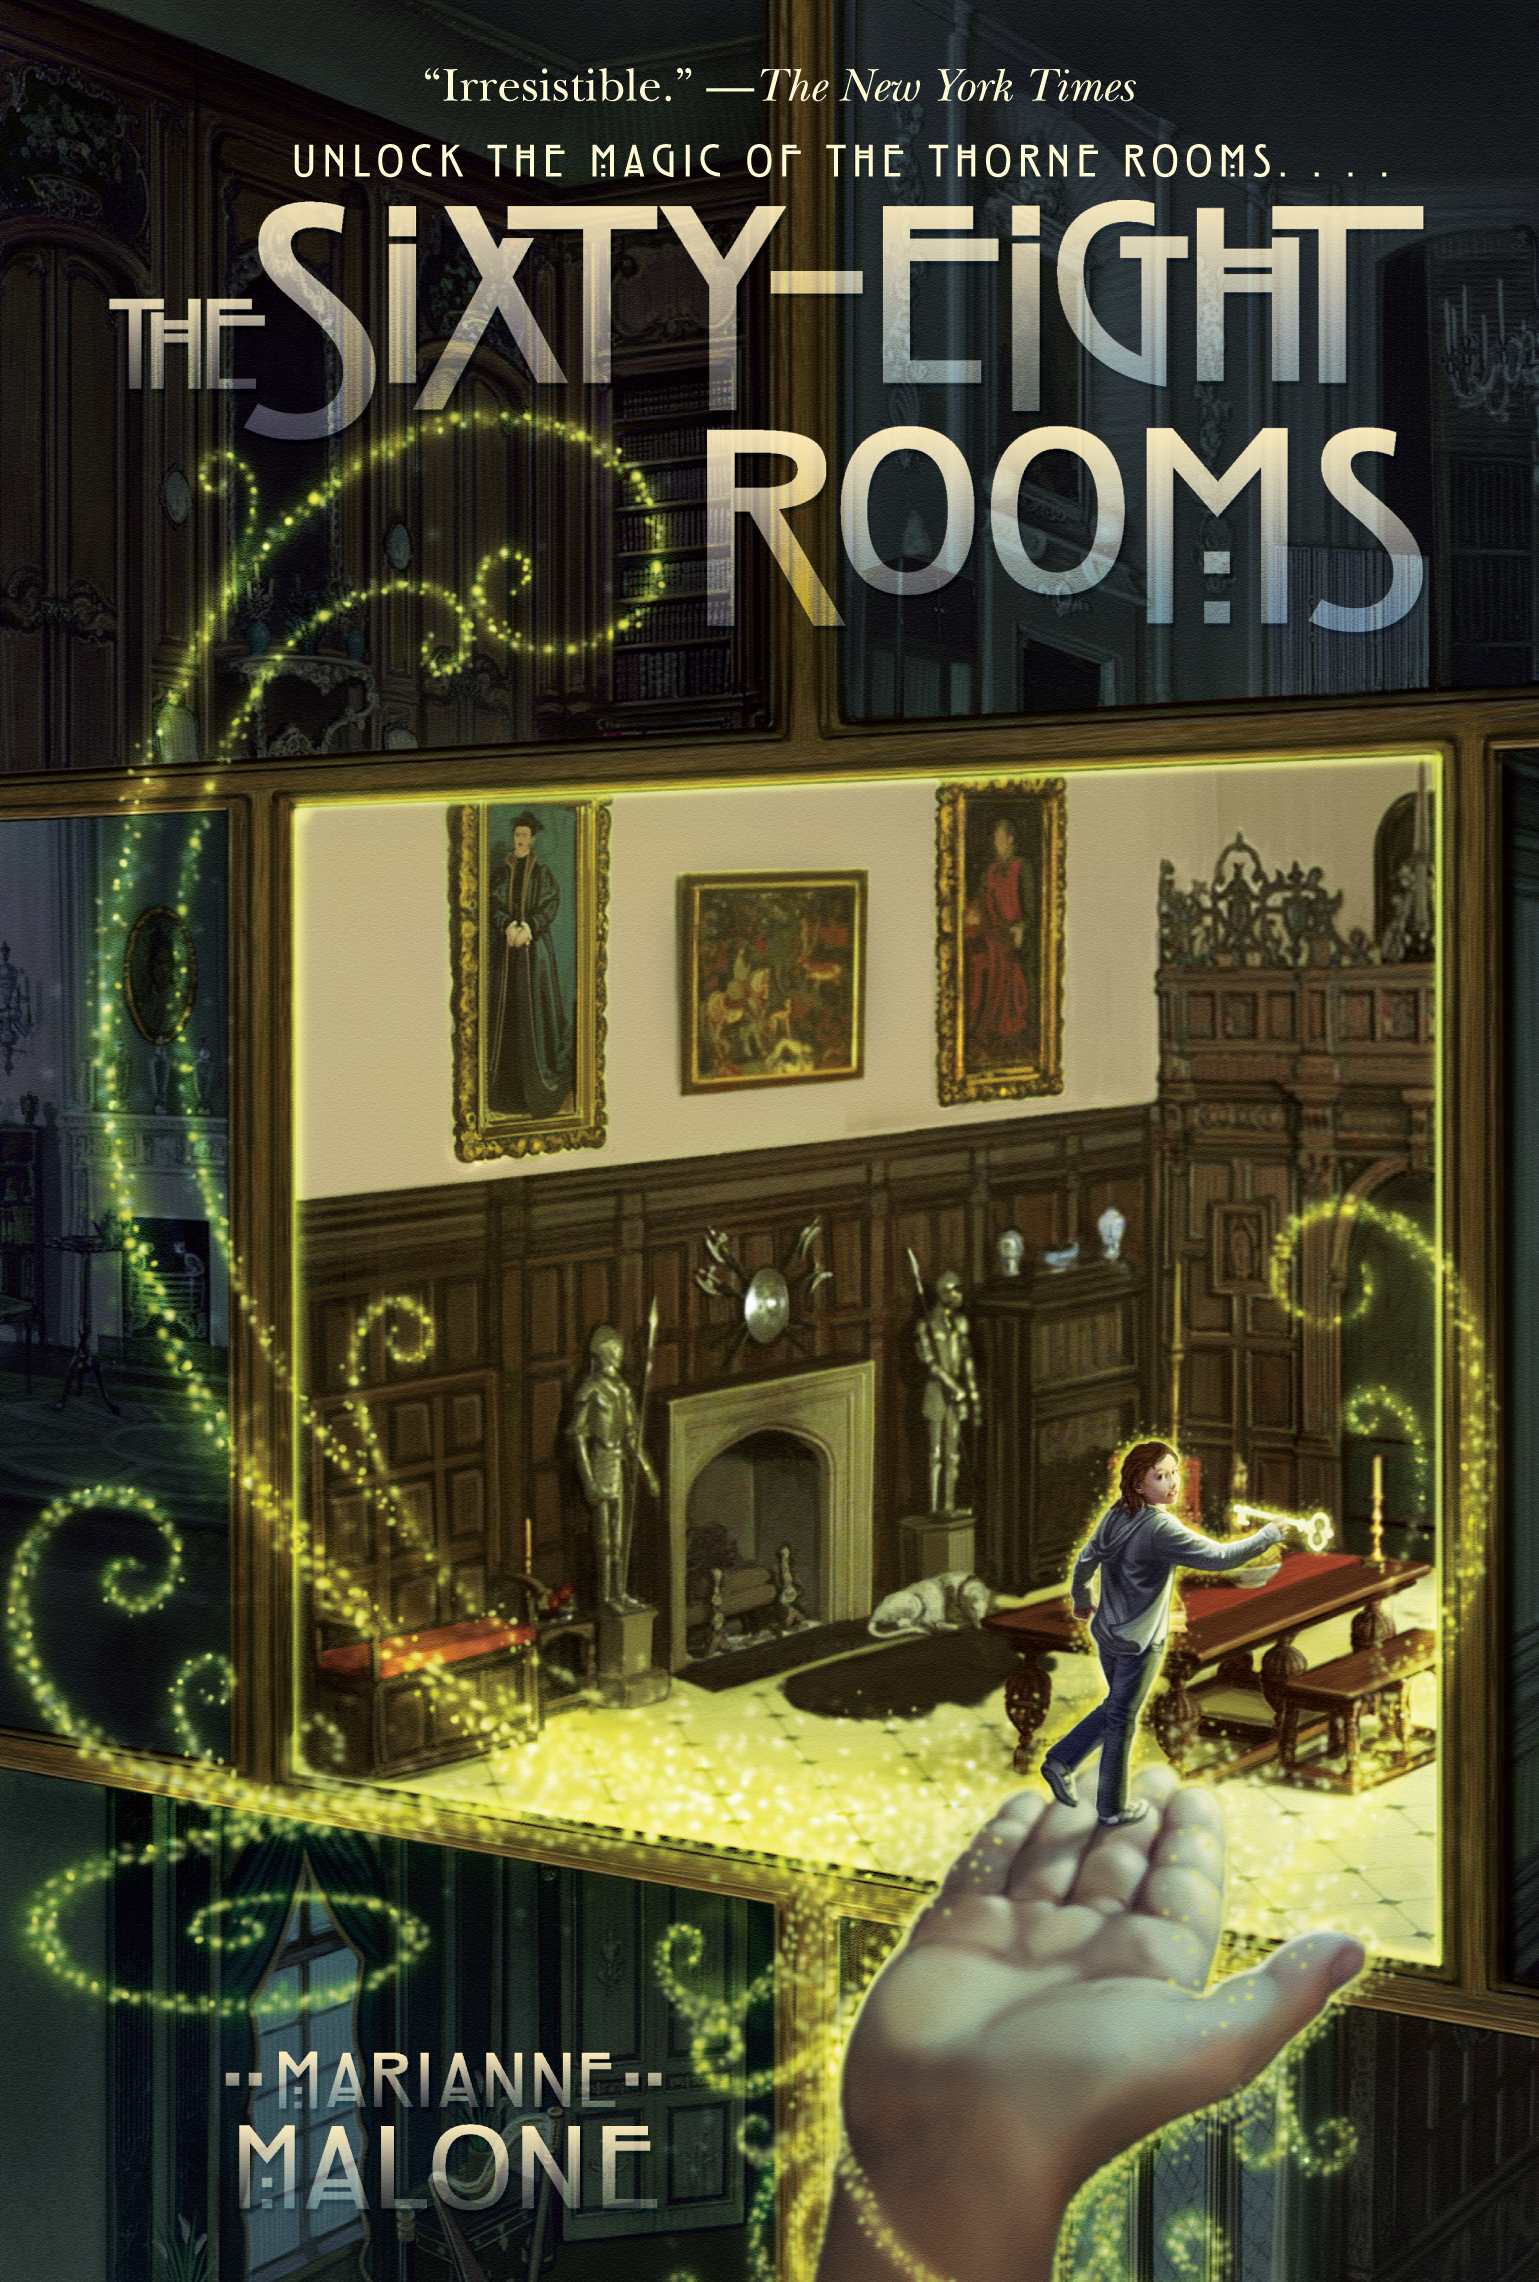 The Sixty-Eight Rooms book cover